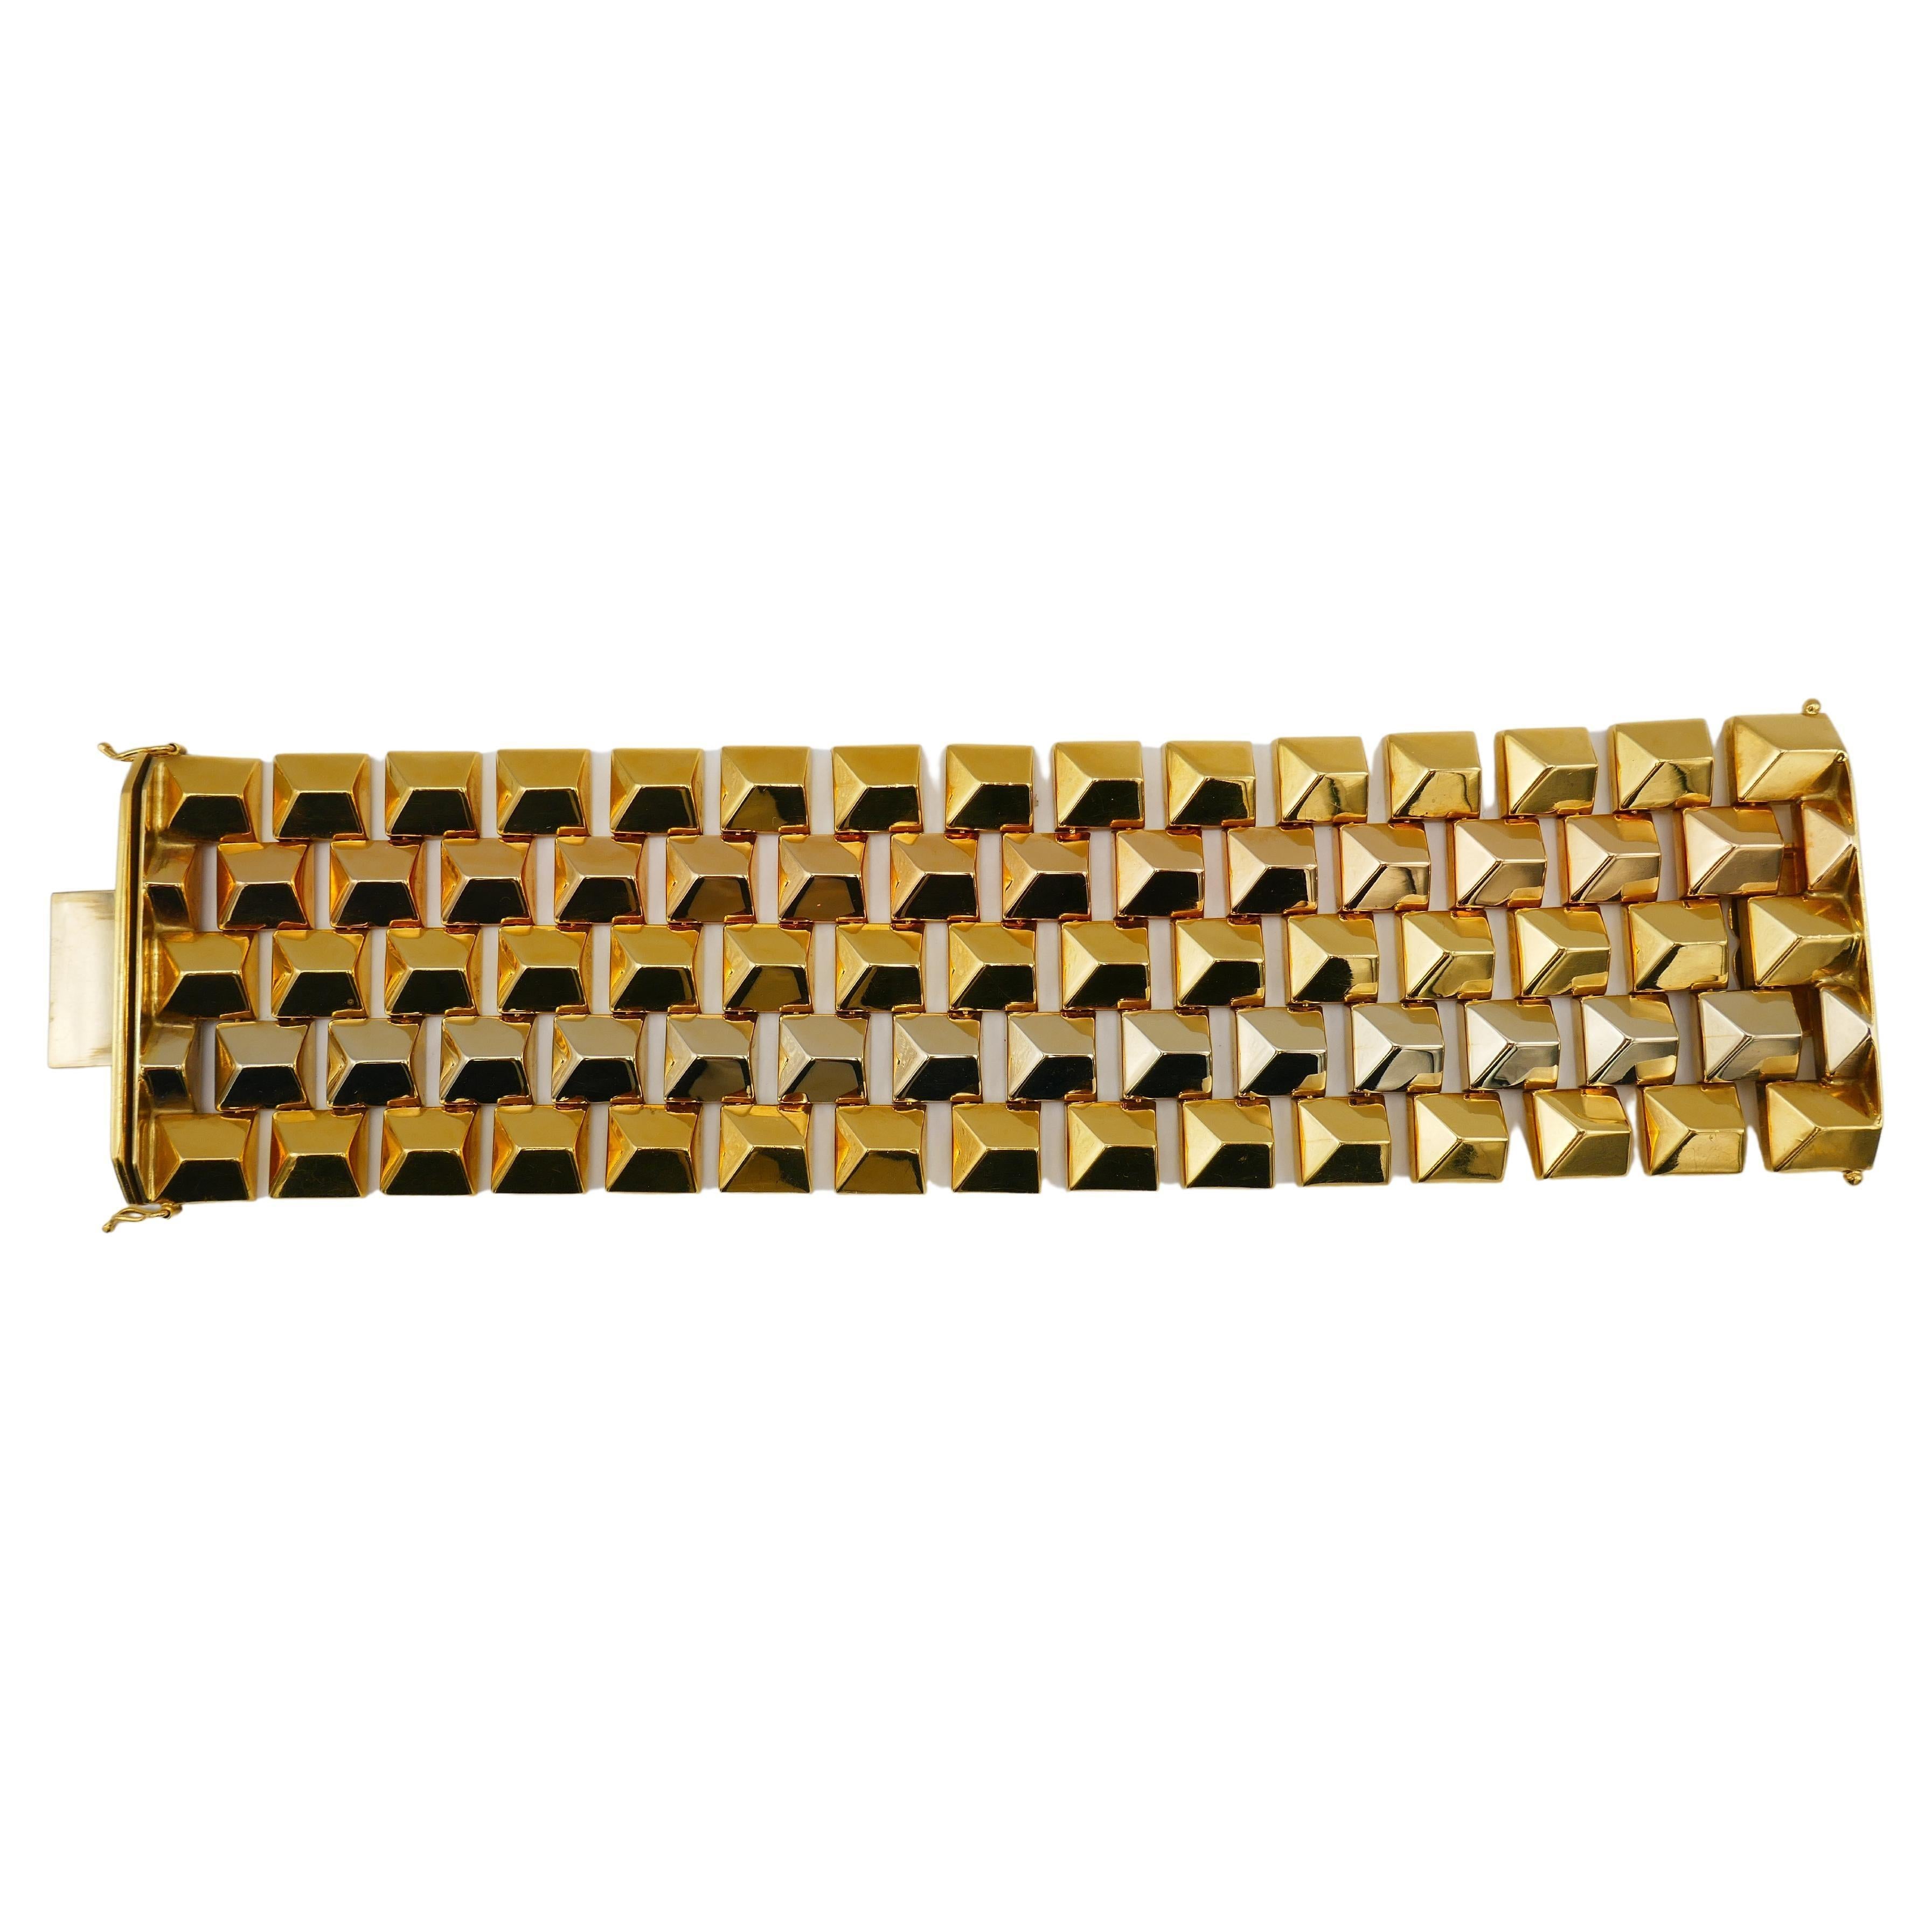 A wide and shiny Retro gold bracelet, made of 18k yellow, white and rose gold. 
This impressive geometrical piece is comprised of the gold square pyramids connected by the invisible hinges. 
The bracelet is silky smooth and flexible. It features